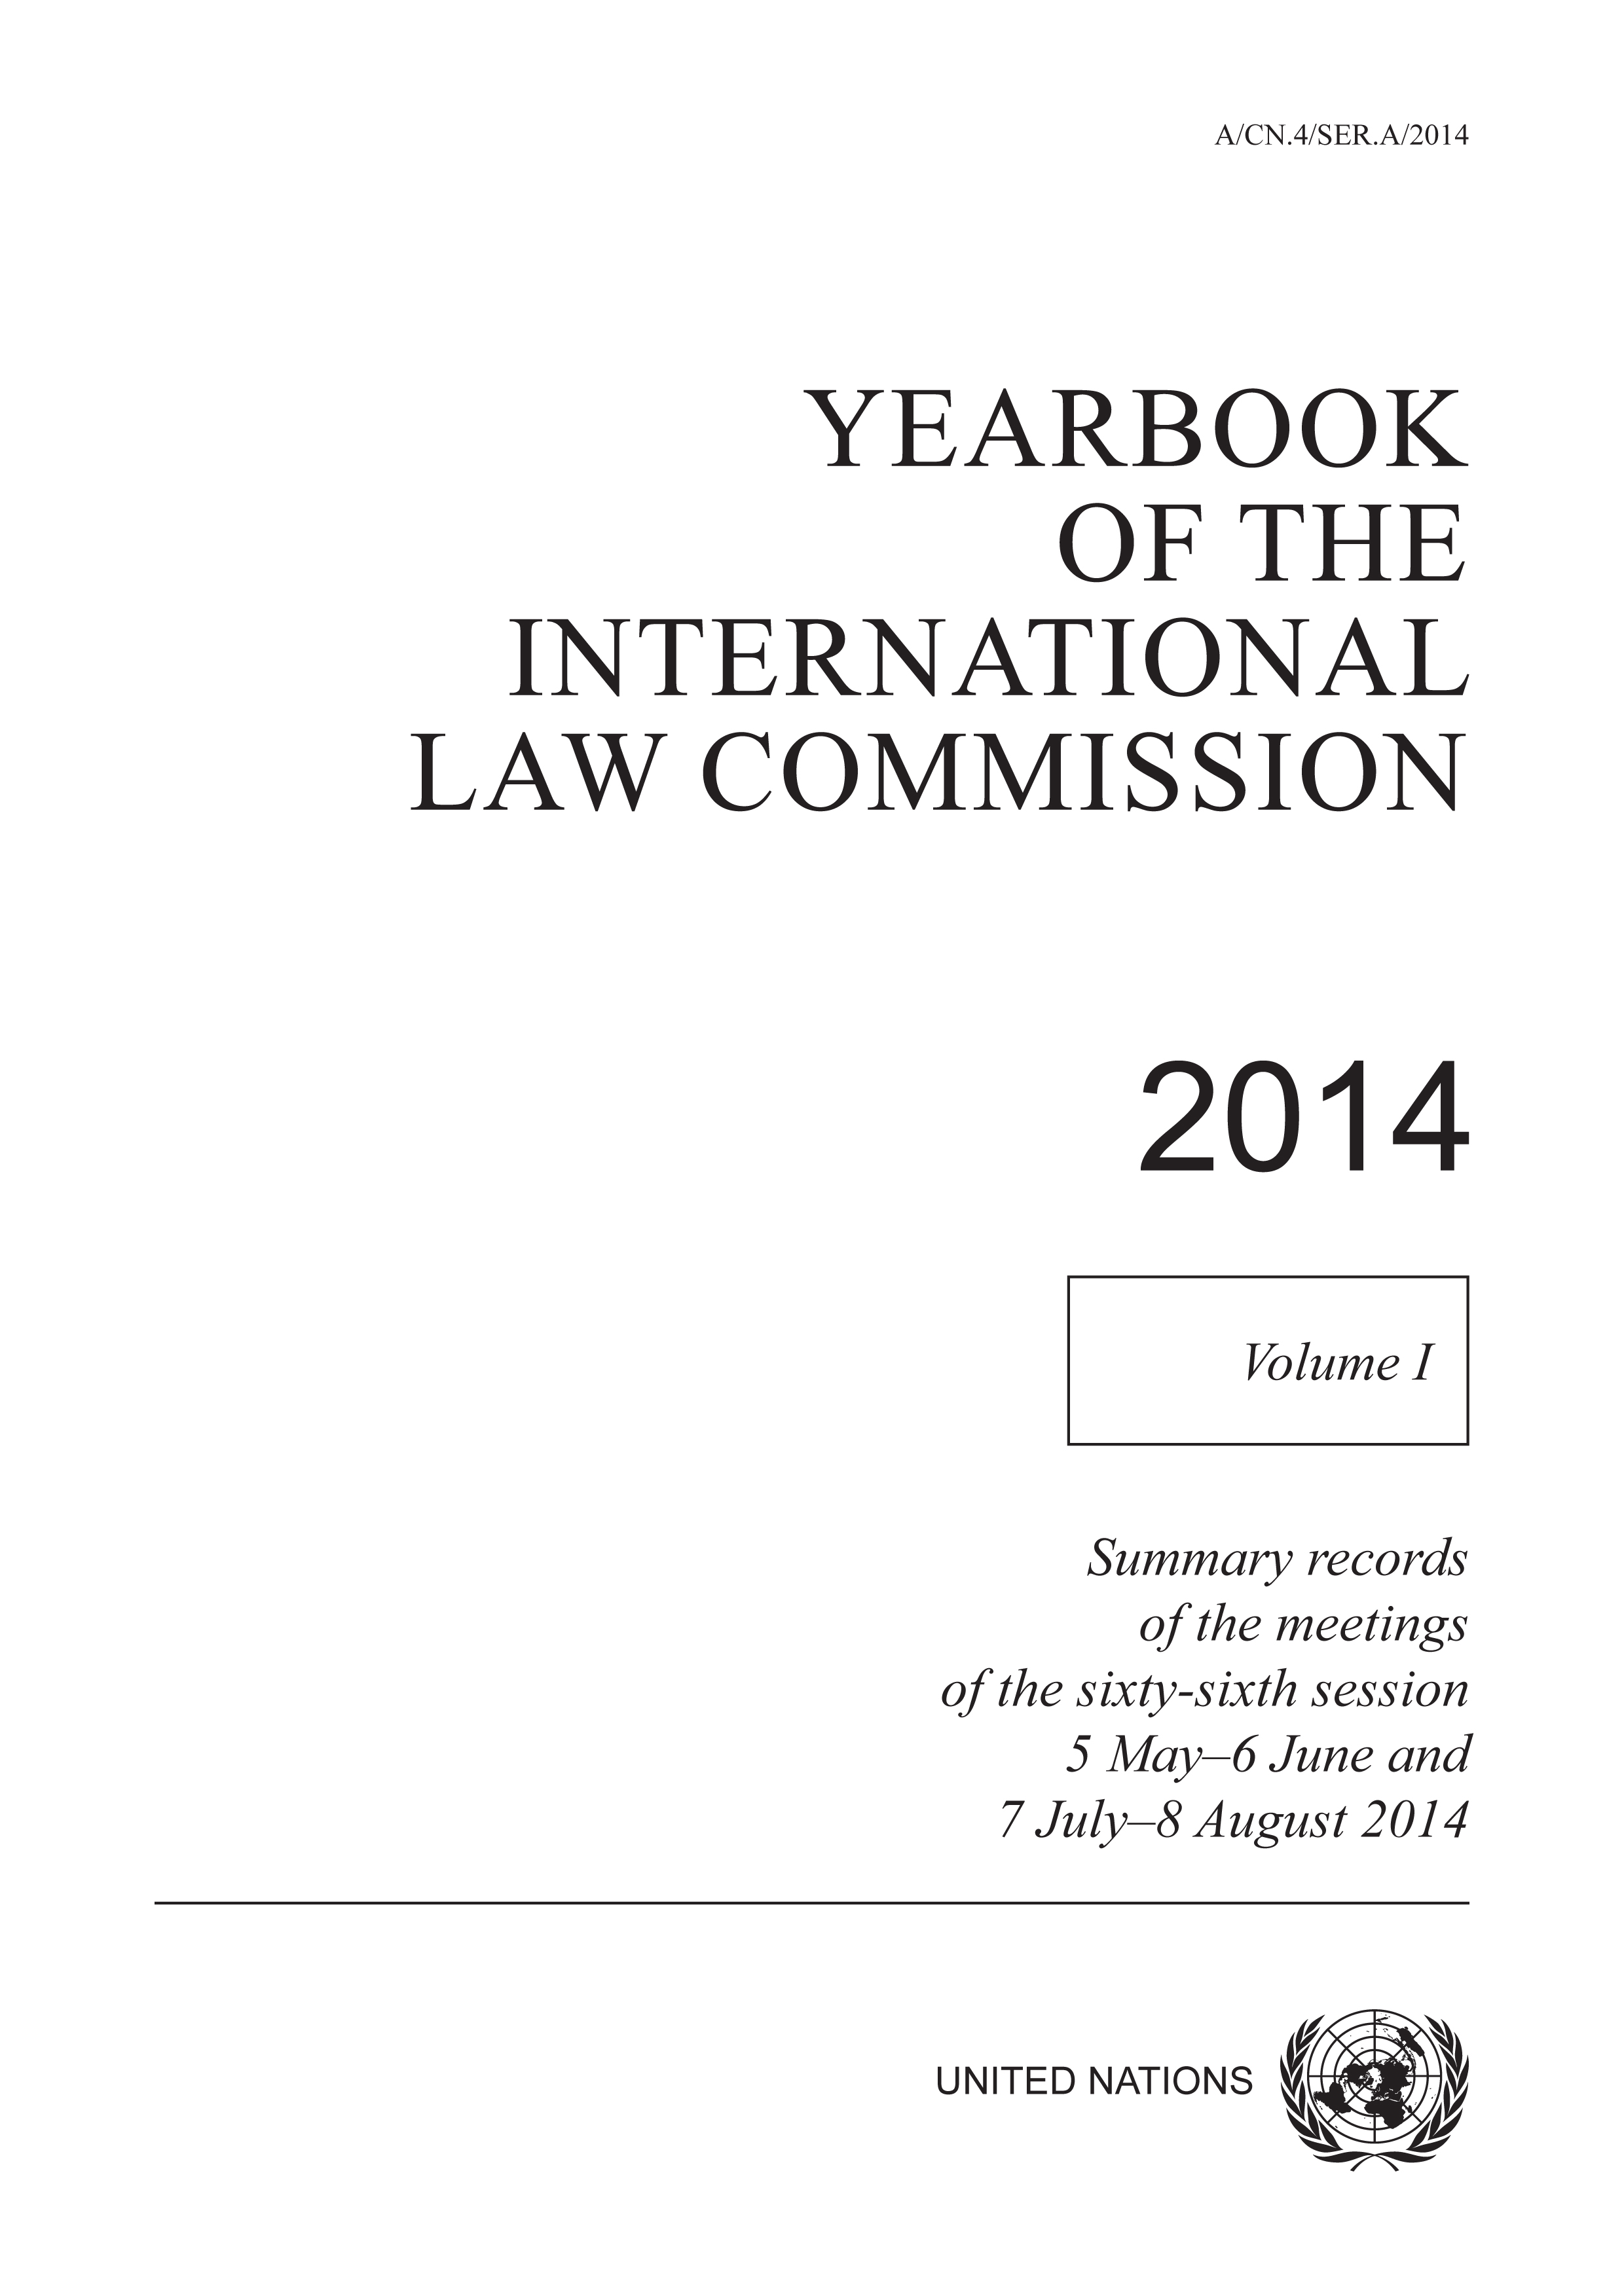 image of Yearbook of the International Law Commission 2014, Vol. I